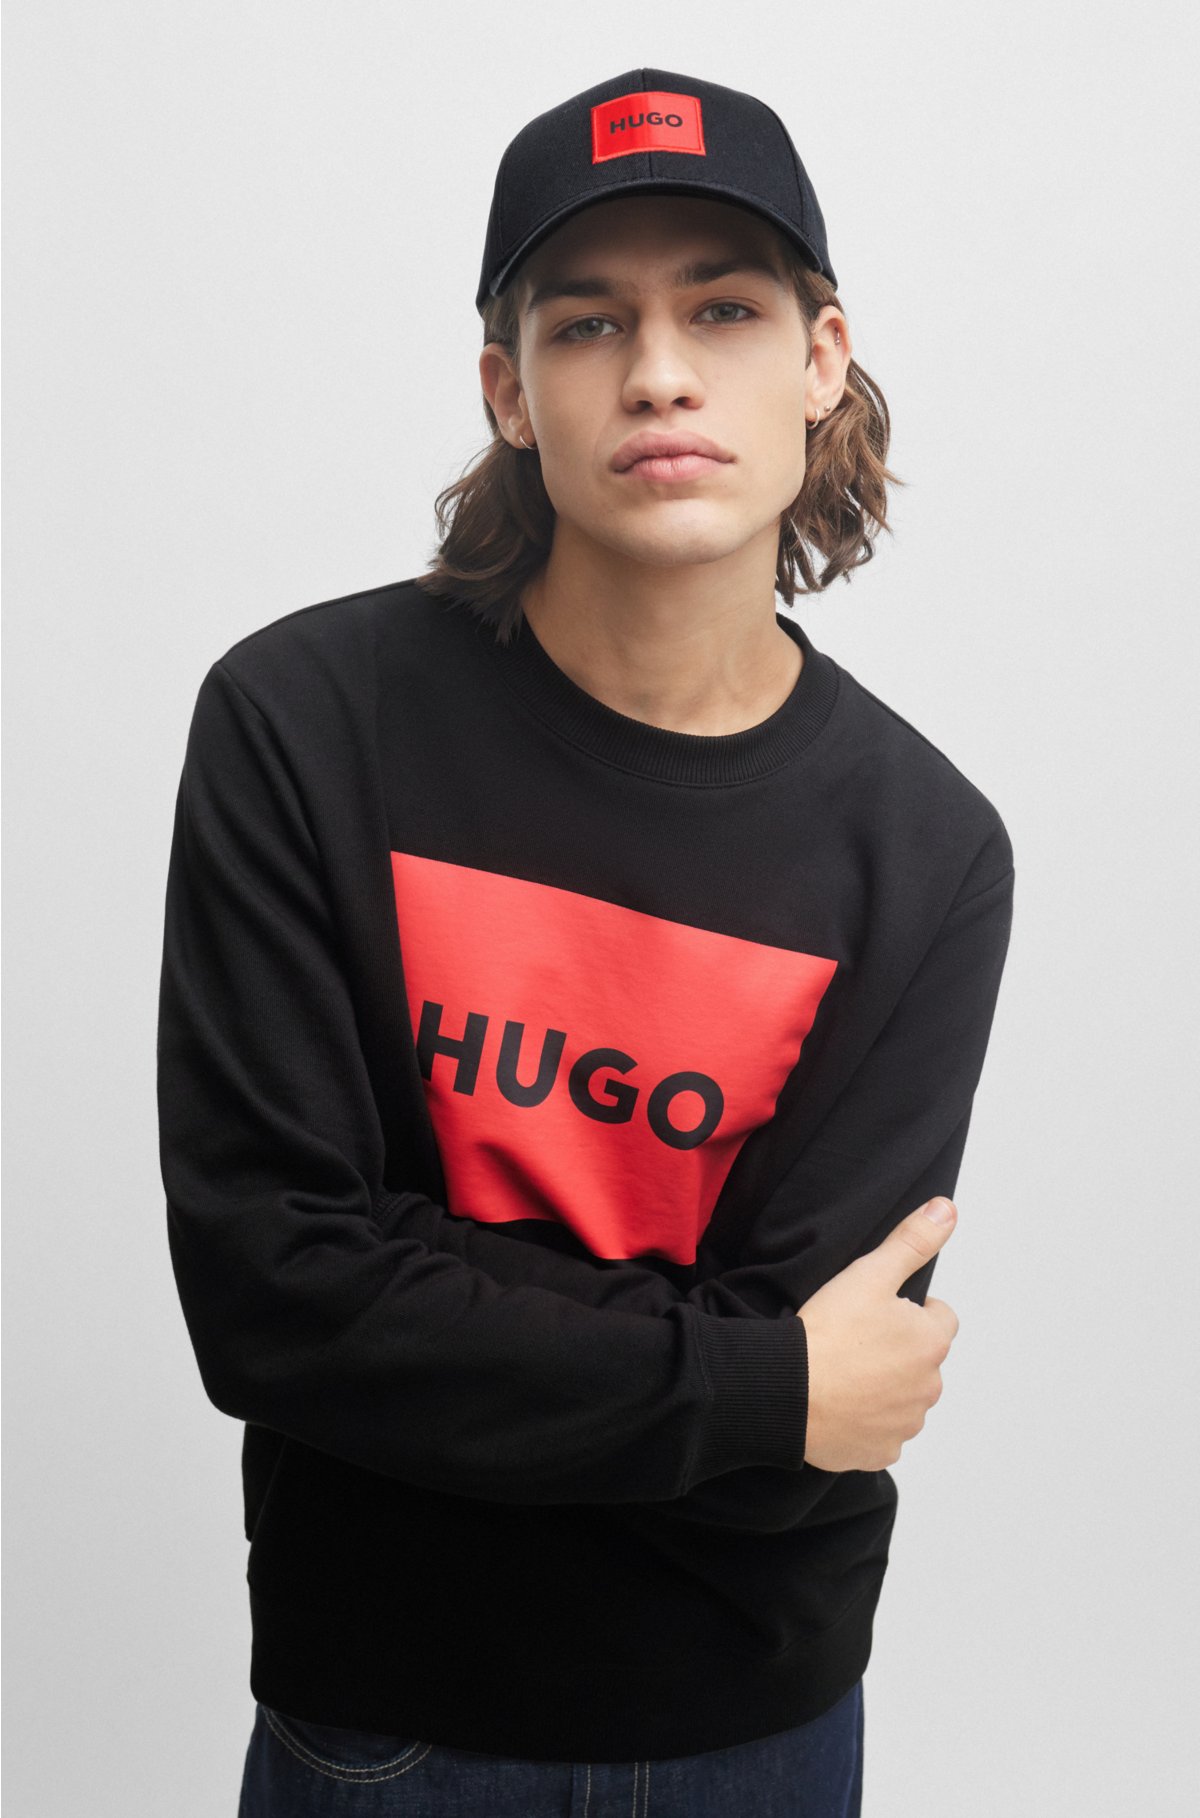 HUGO - cap with Cotton-twill red label logo